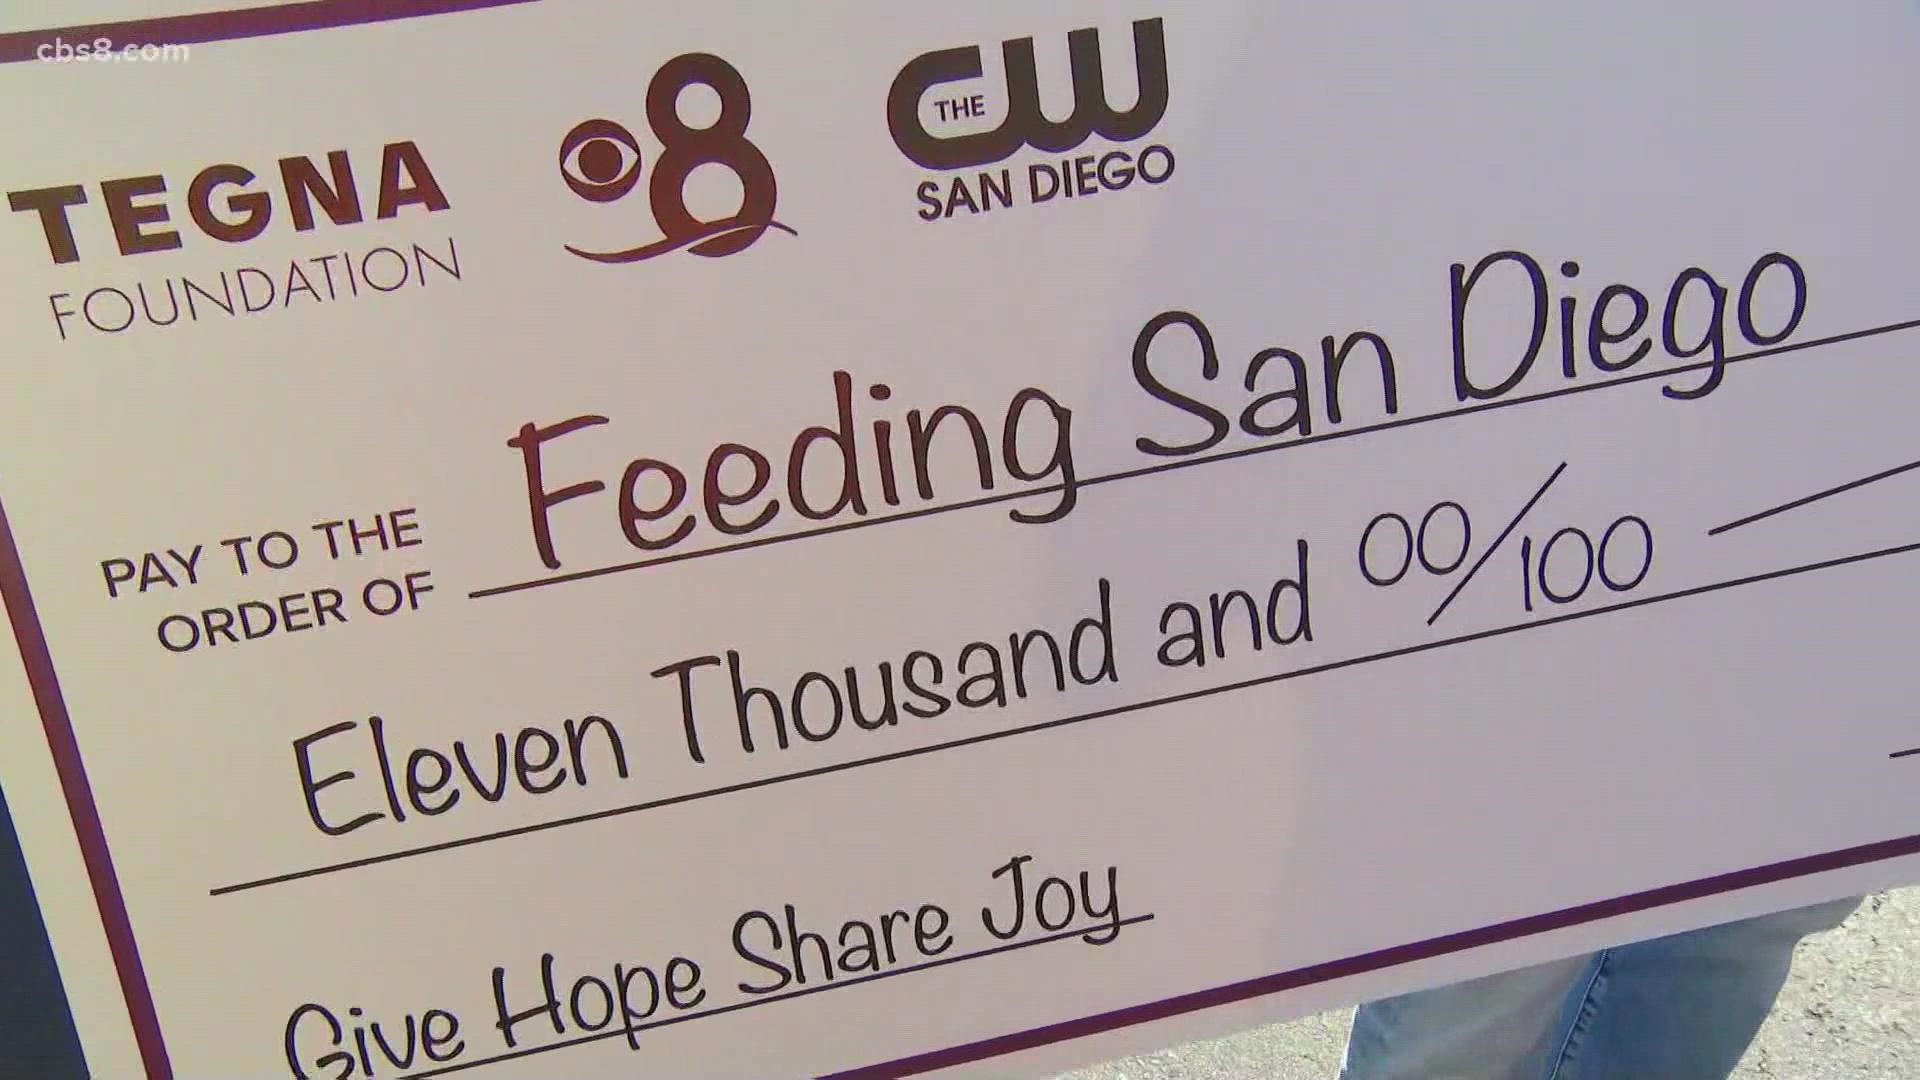 During the food drive Friday, December 17, CBS 8, on behalf of the TEGNA Foundation, presented Feeding San Diego with a $11,000 check to help with the need.